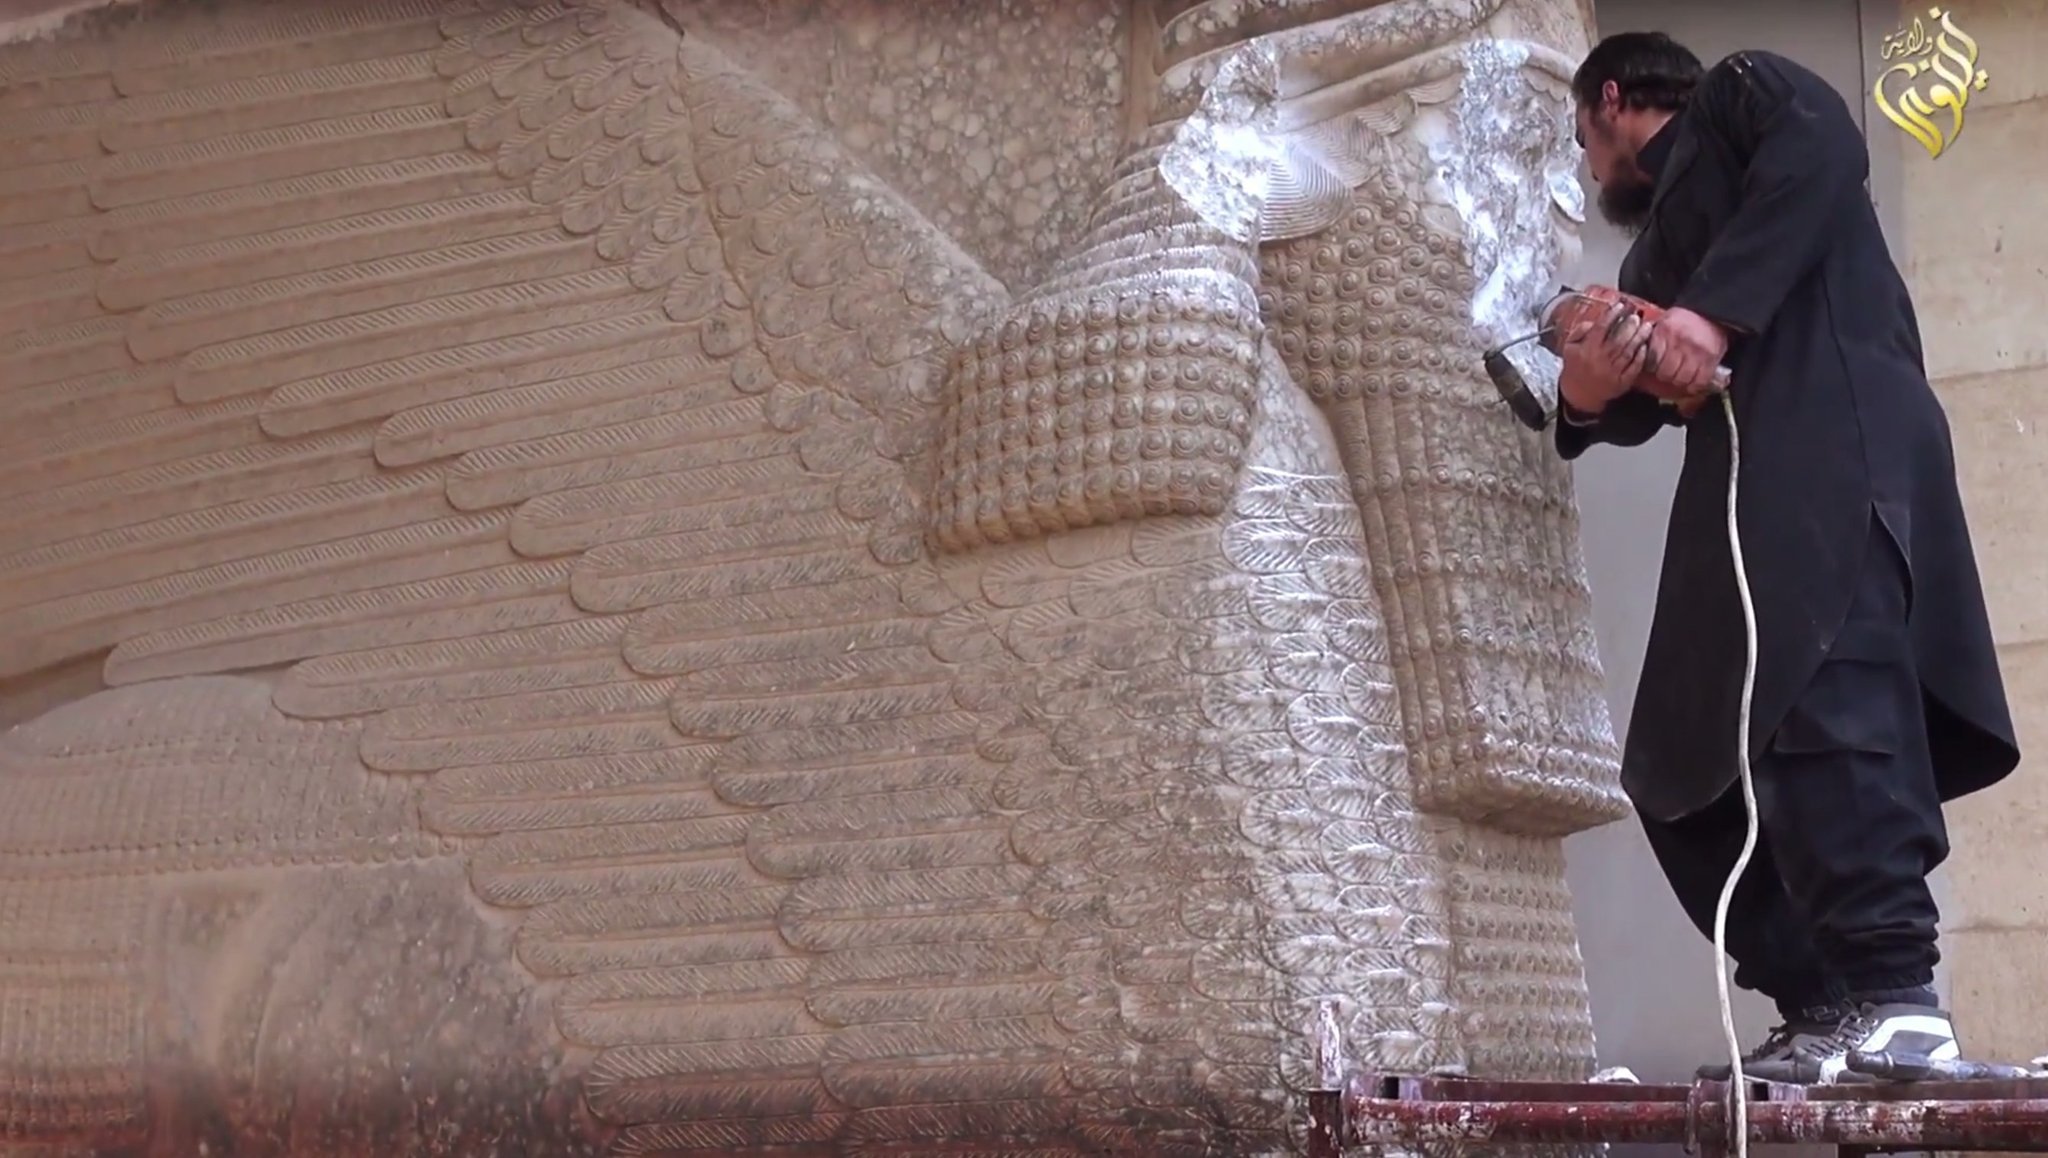 ISIS has turned the destruction of ancient artifacts into.